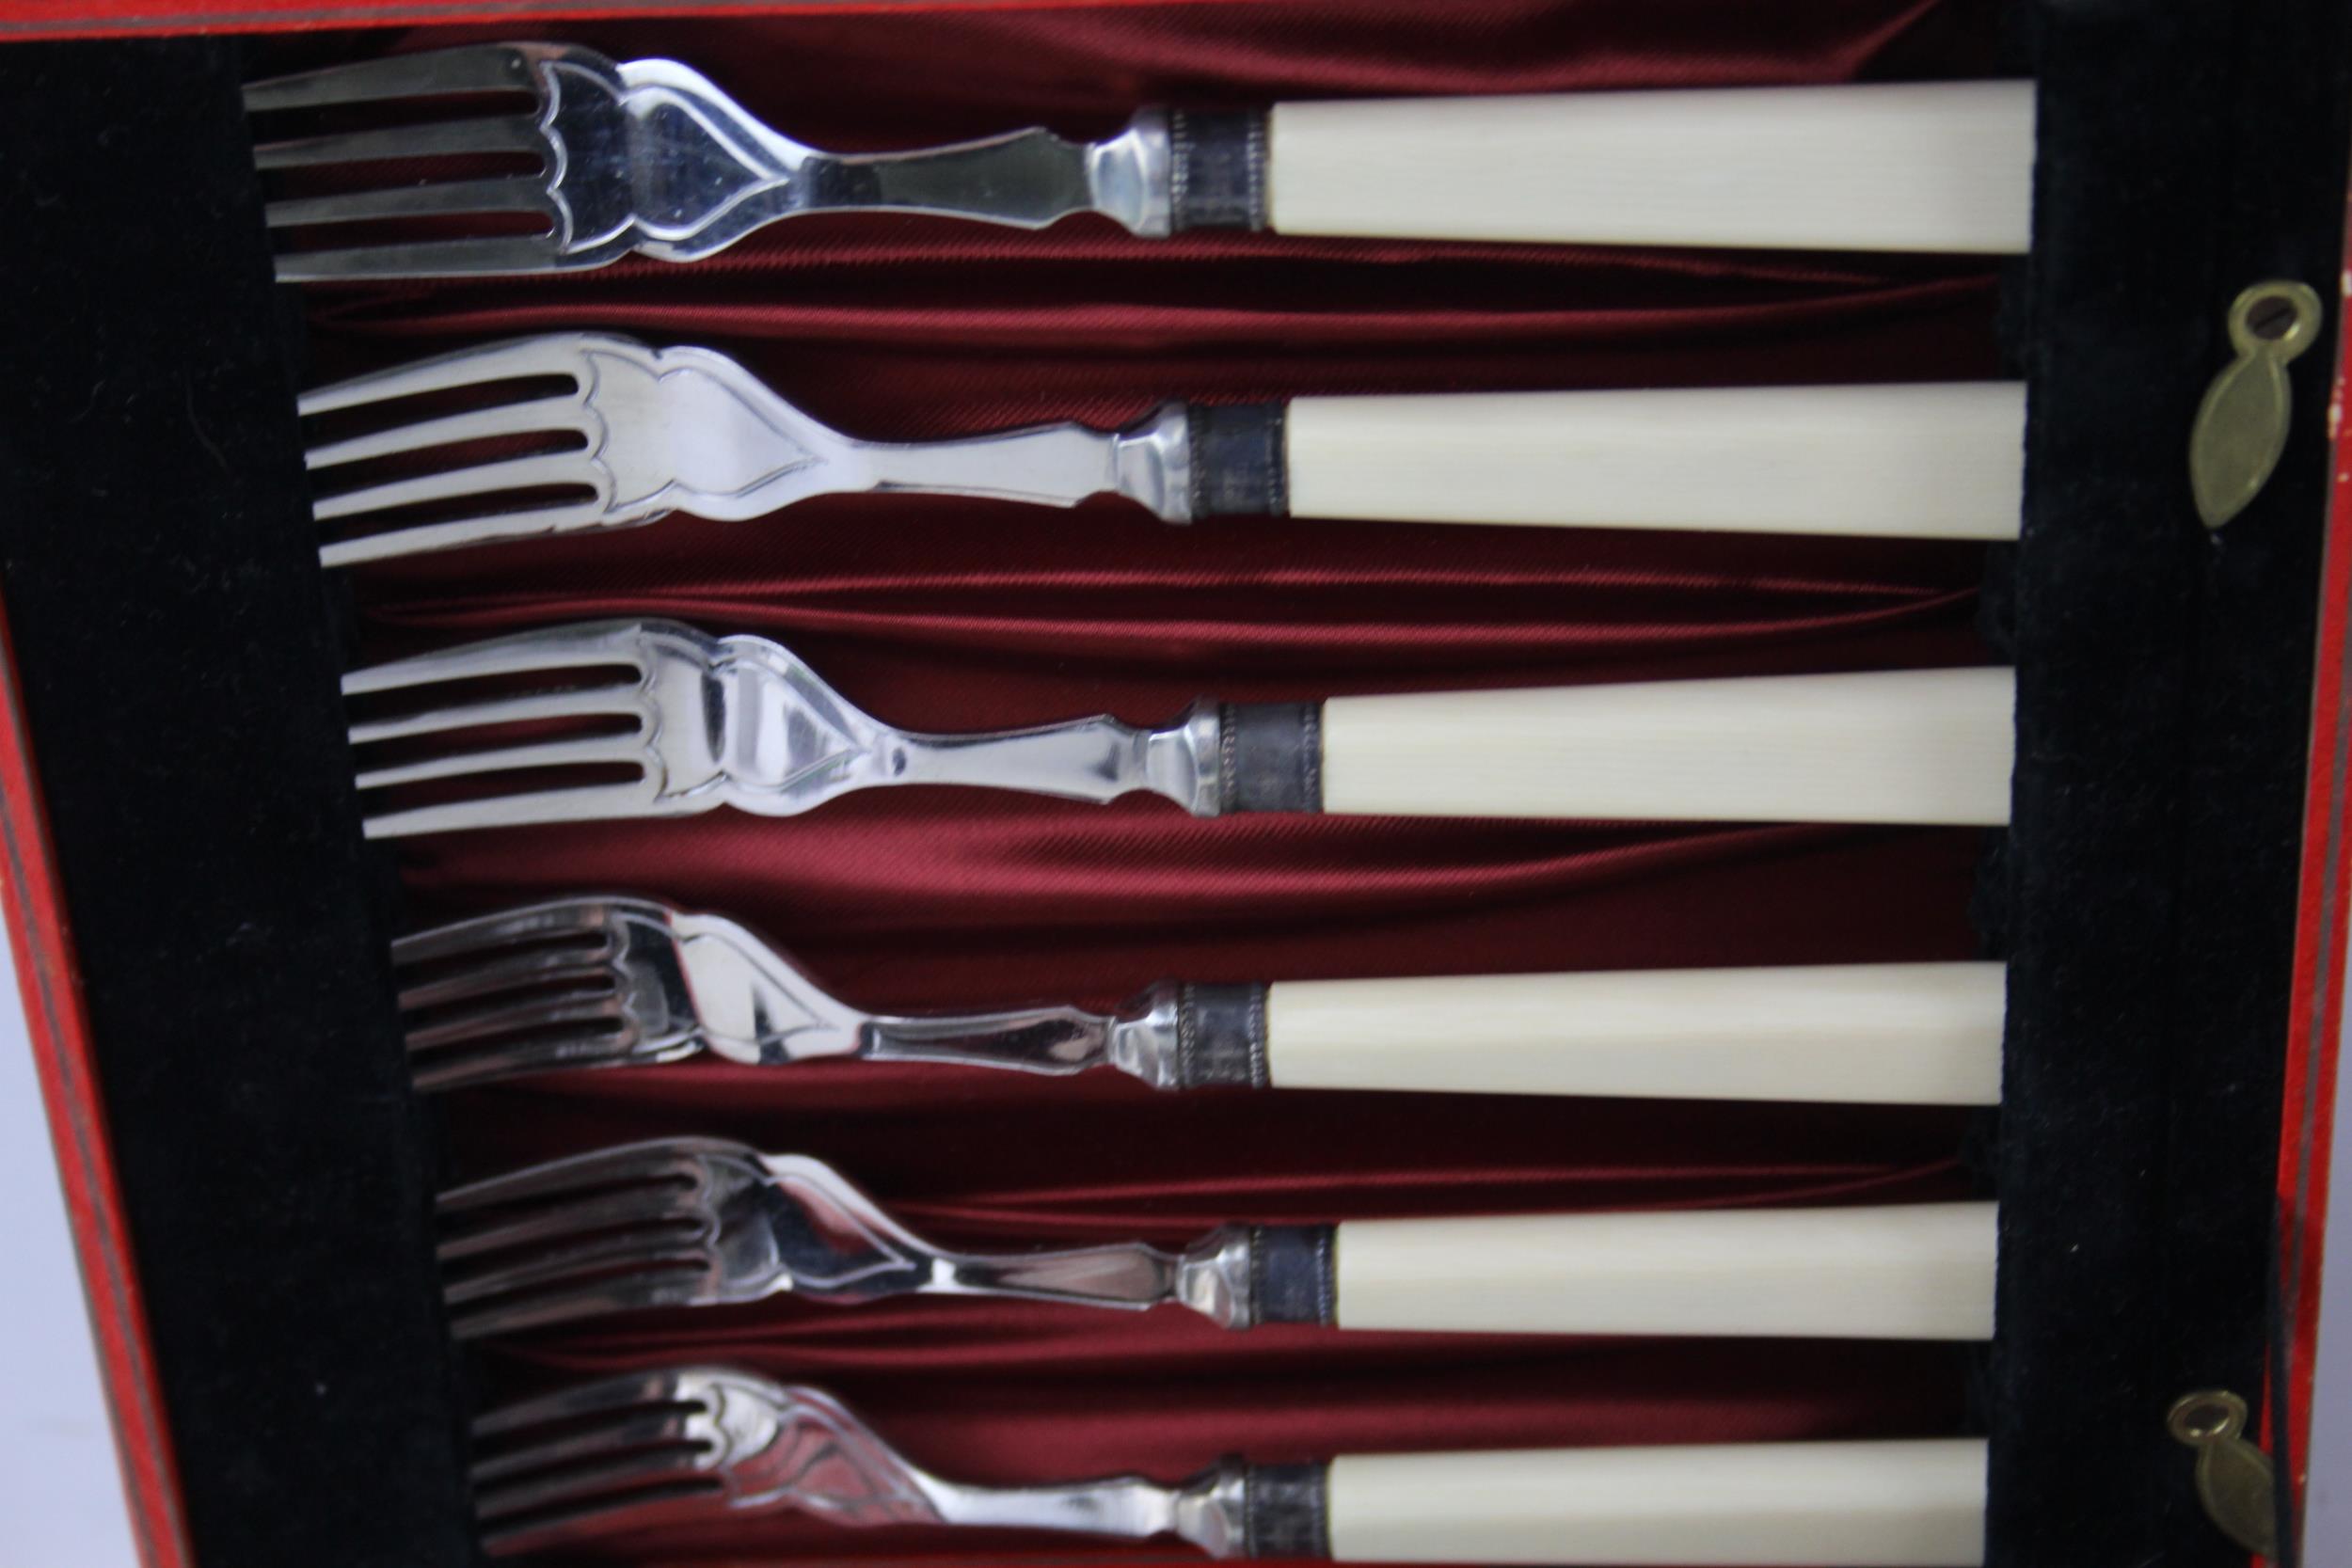 Silver Plate Cutlery Sets Fish Cutlery Ivorine Wooden Canteens x 4 - Silver Plate Cutlery Sets - Image 3 of 9